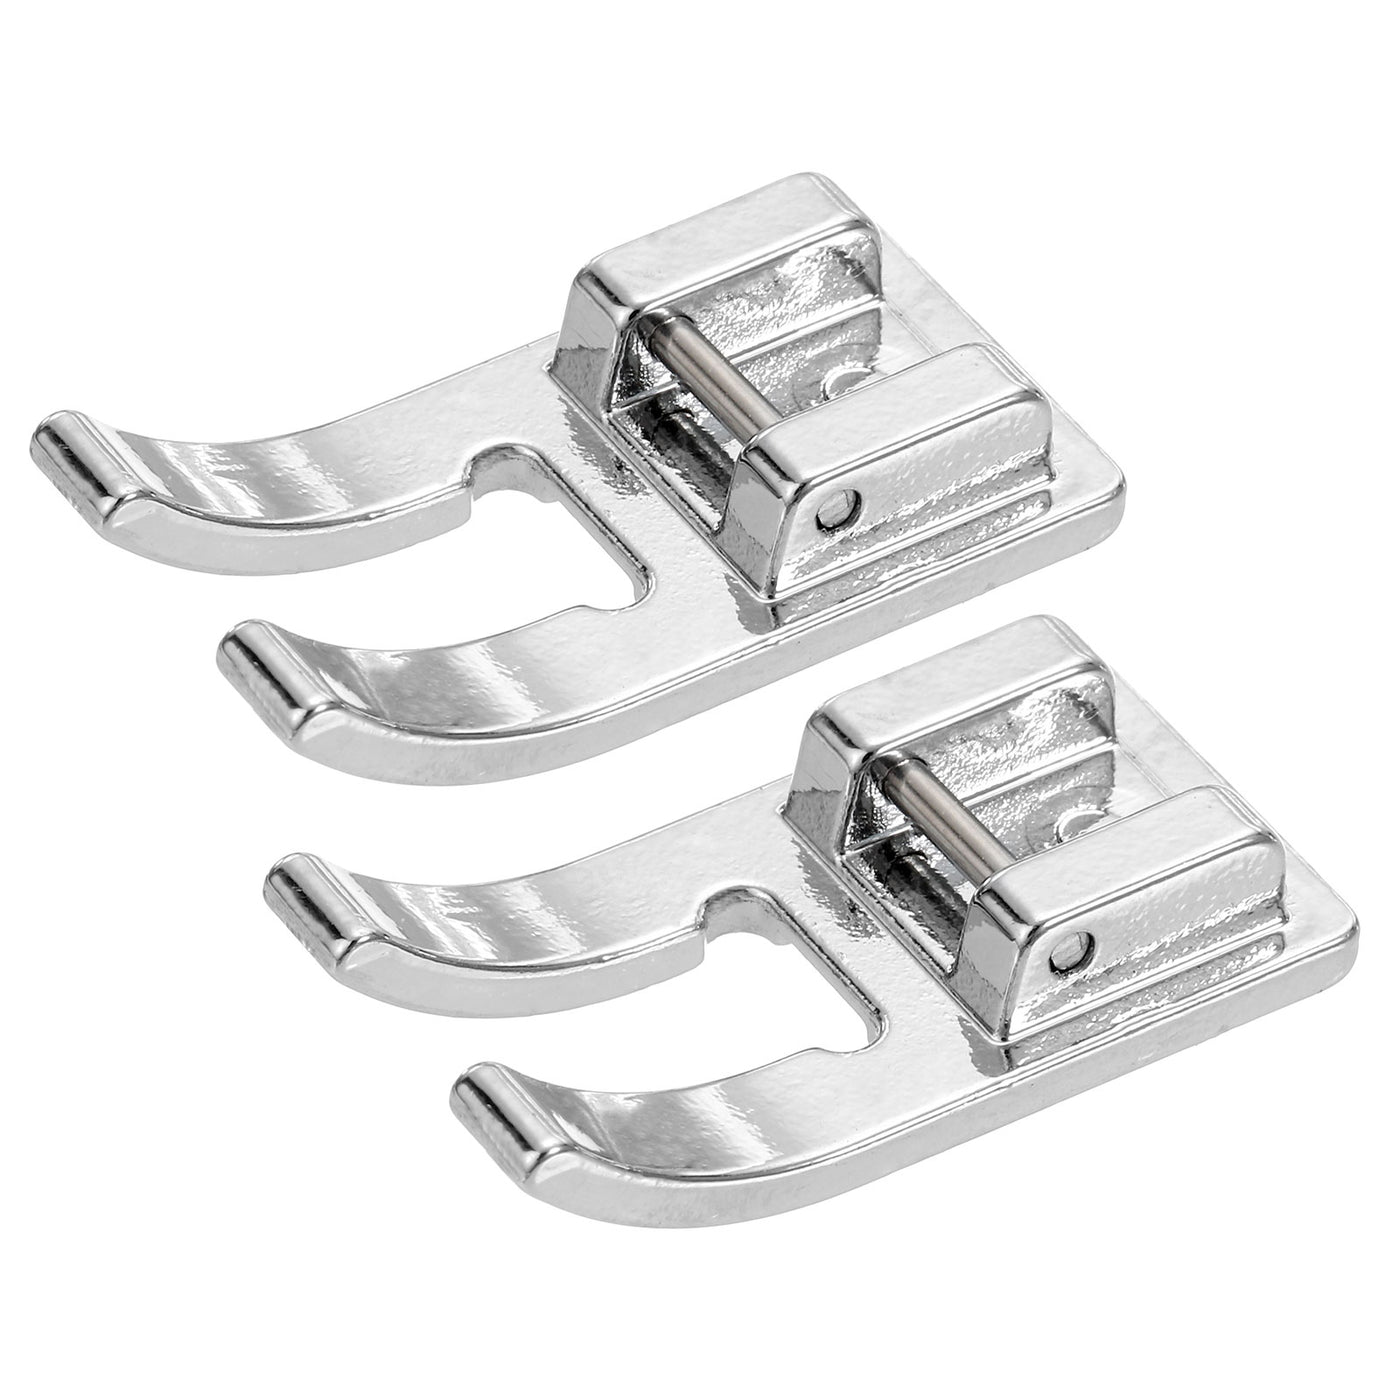 uxcell Uxcell Open Toe Foot Sewing Machine Foot Galvanized Iron Presser Foot Tool